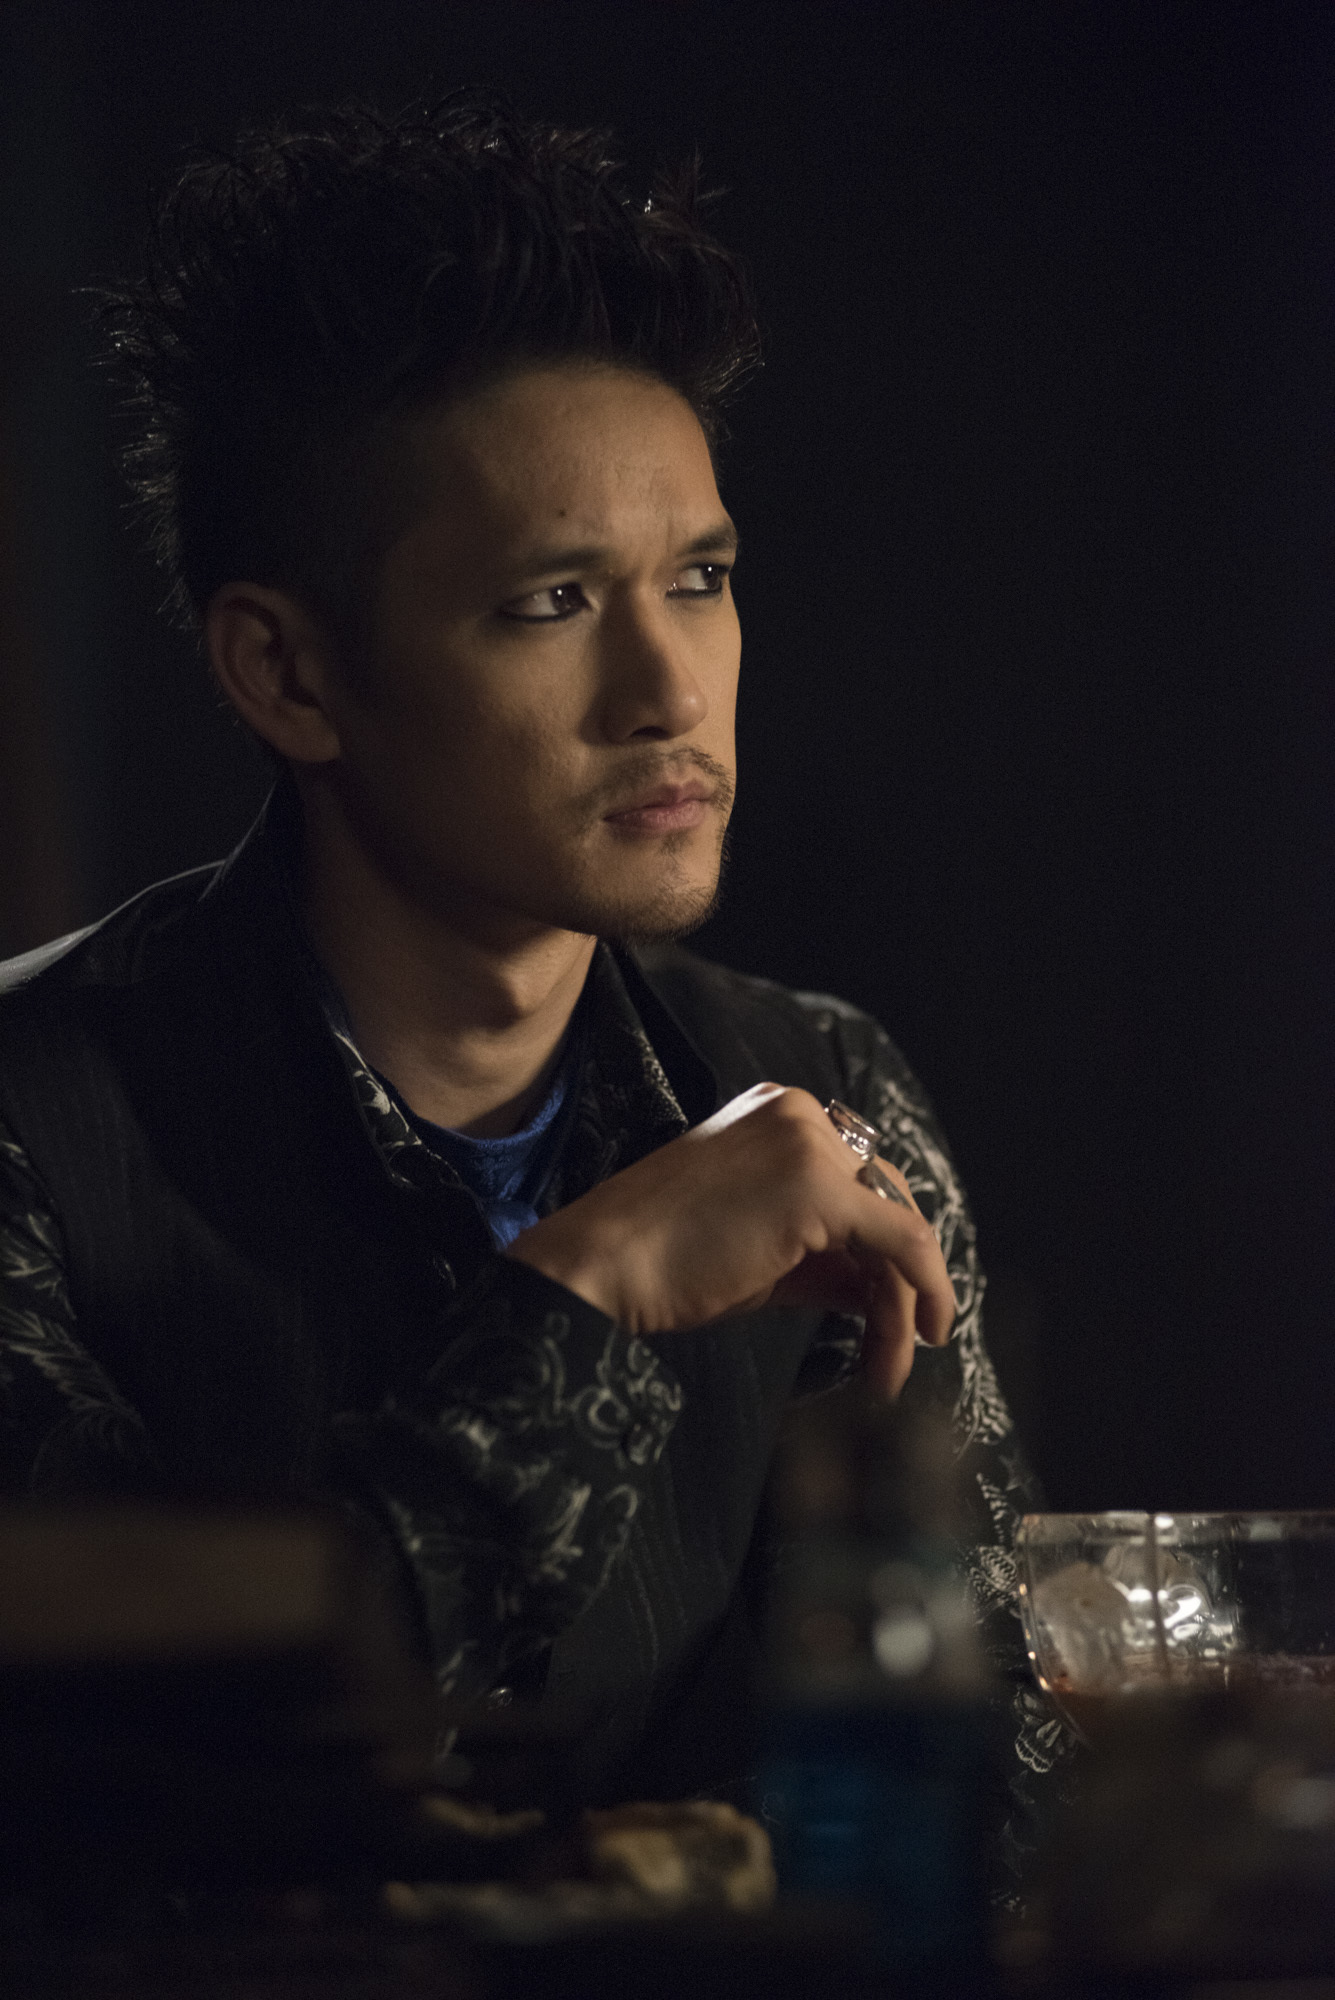 SHADOWHUNTERS 3x07 "Salt In The Wound"